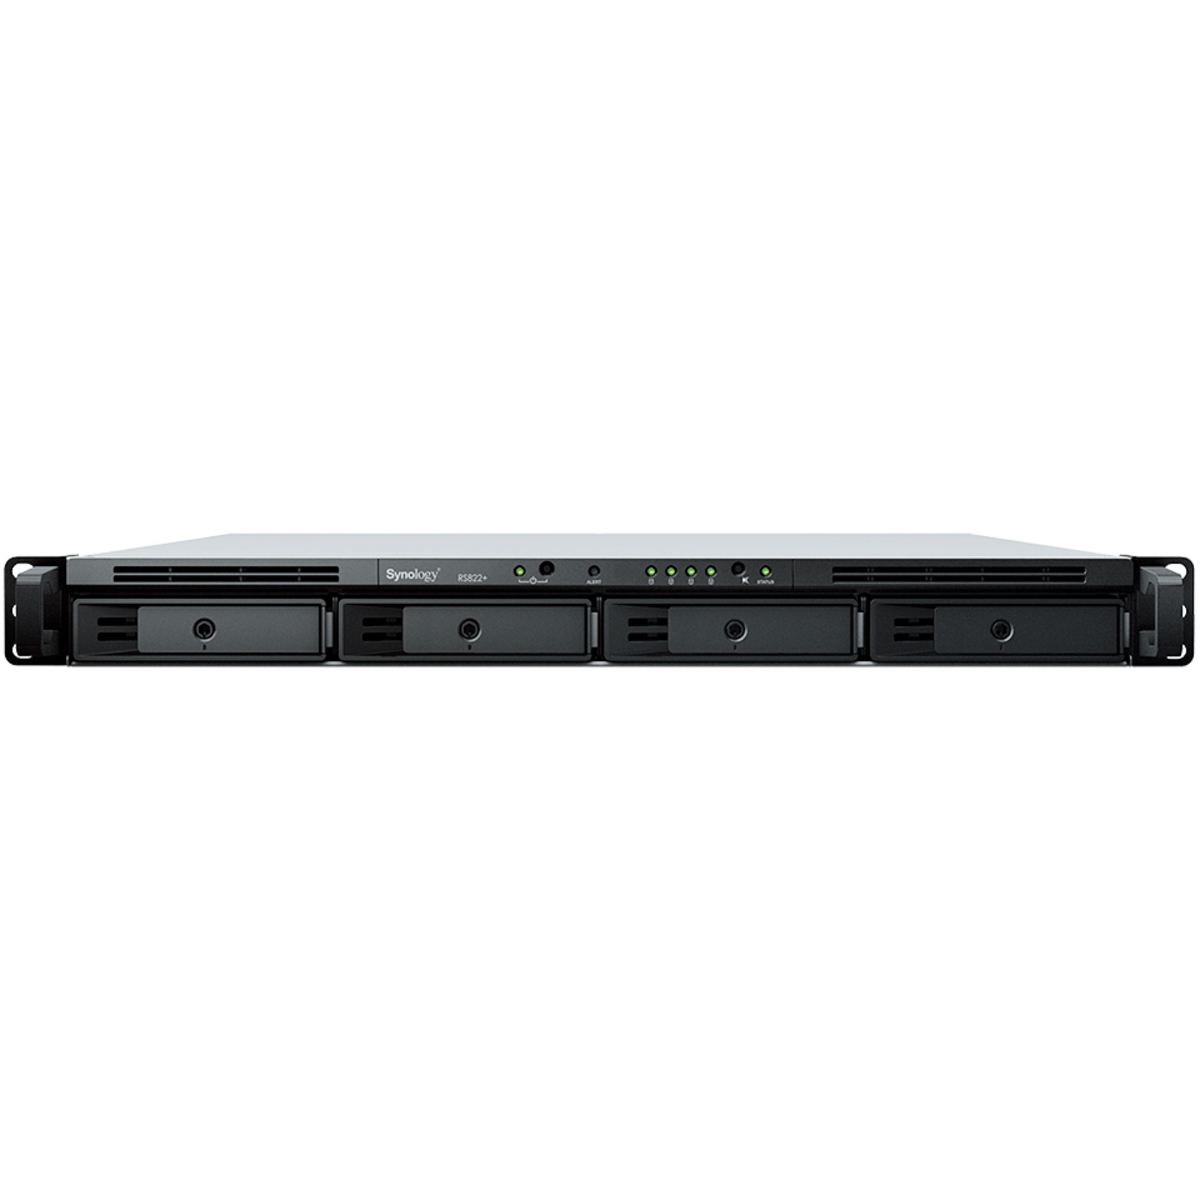 buy $2931 Synology RackStation RS822RP+ 80tb RackMount NAS - Network Attached Storage Device 4x20000gb Seagate EXOS X20 ST20000NM007D 3.5 7200rpm SATA 6Gb/s HDD ENTERPRISE Class Drives Installed - Burn-In Tested - nas headquarters buy network attached storage server device das new raid-5 free shipping usa RackStation RS822RP+